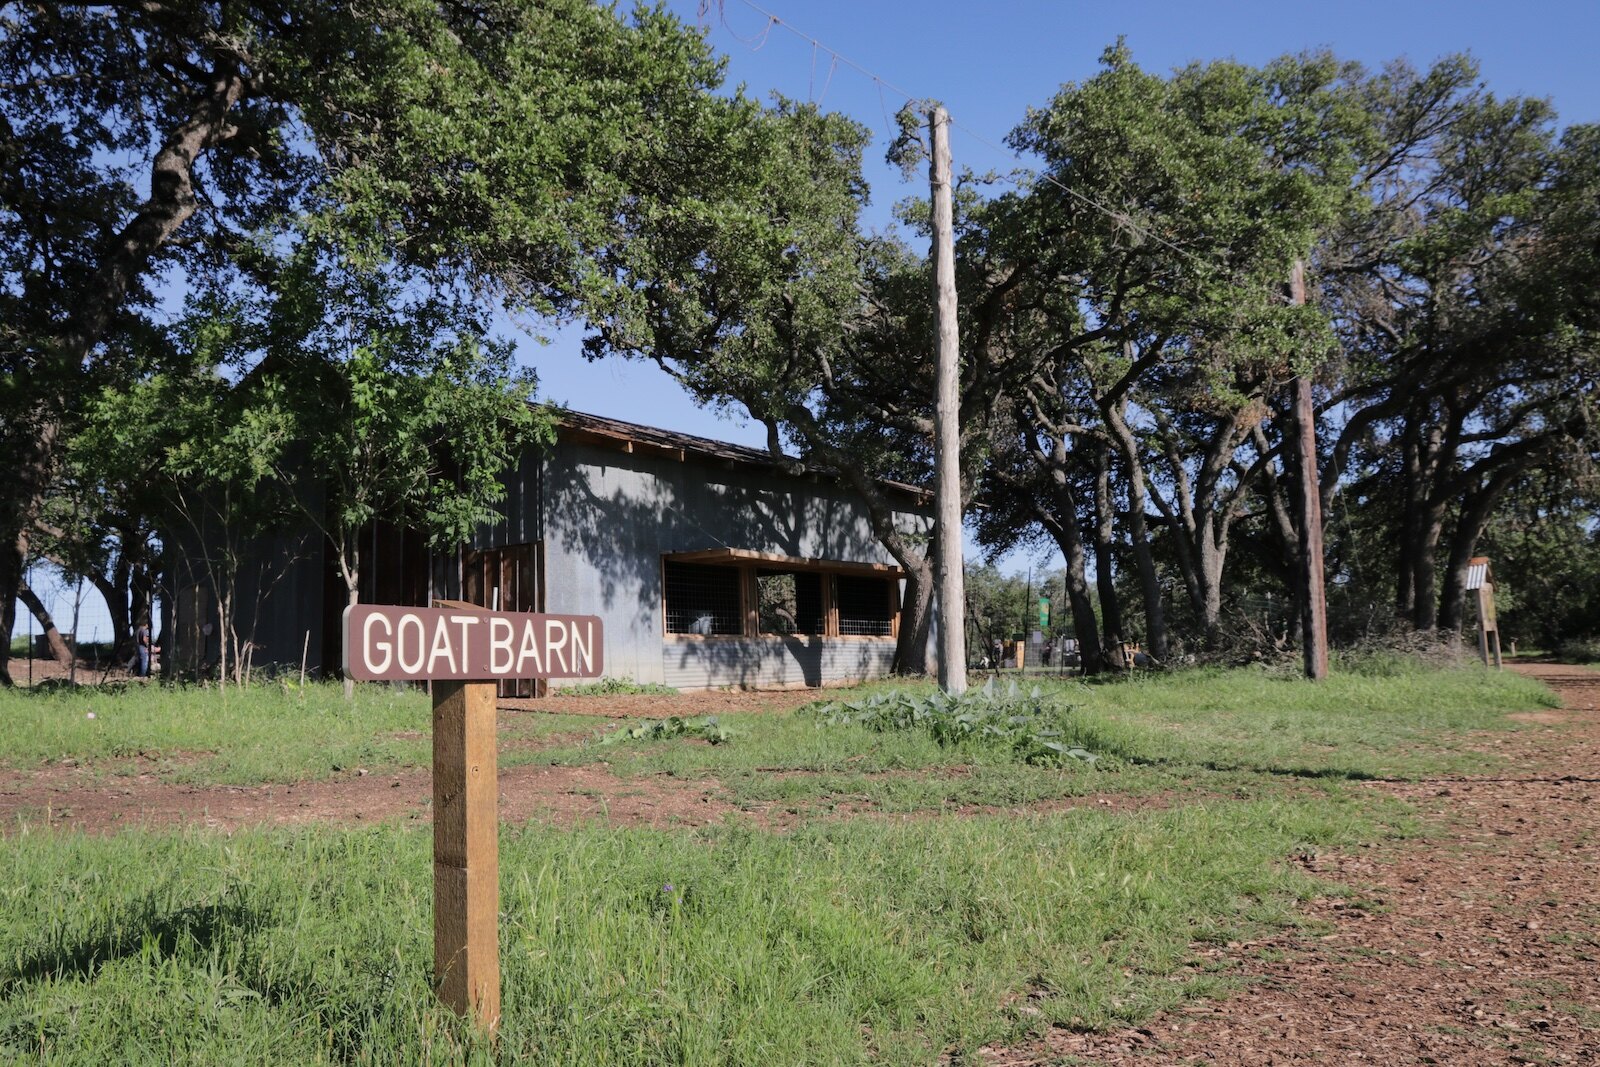 The goat barn at Jester King farm